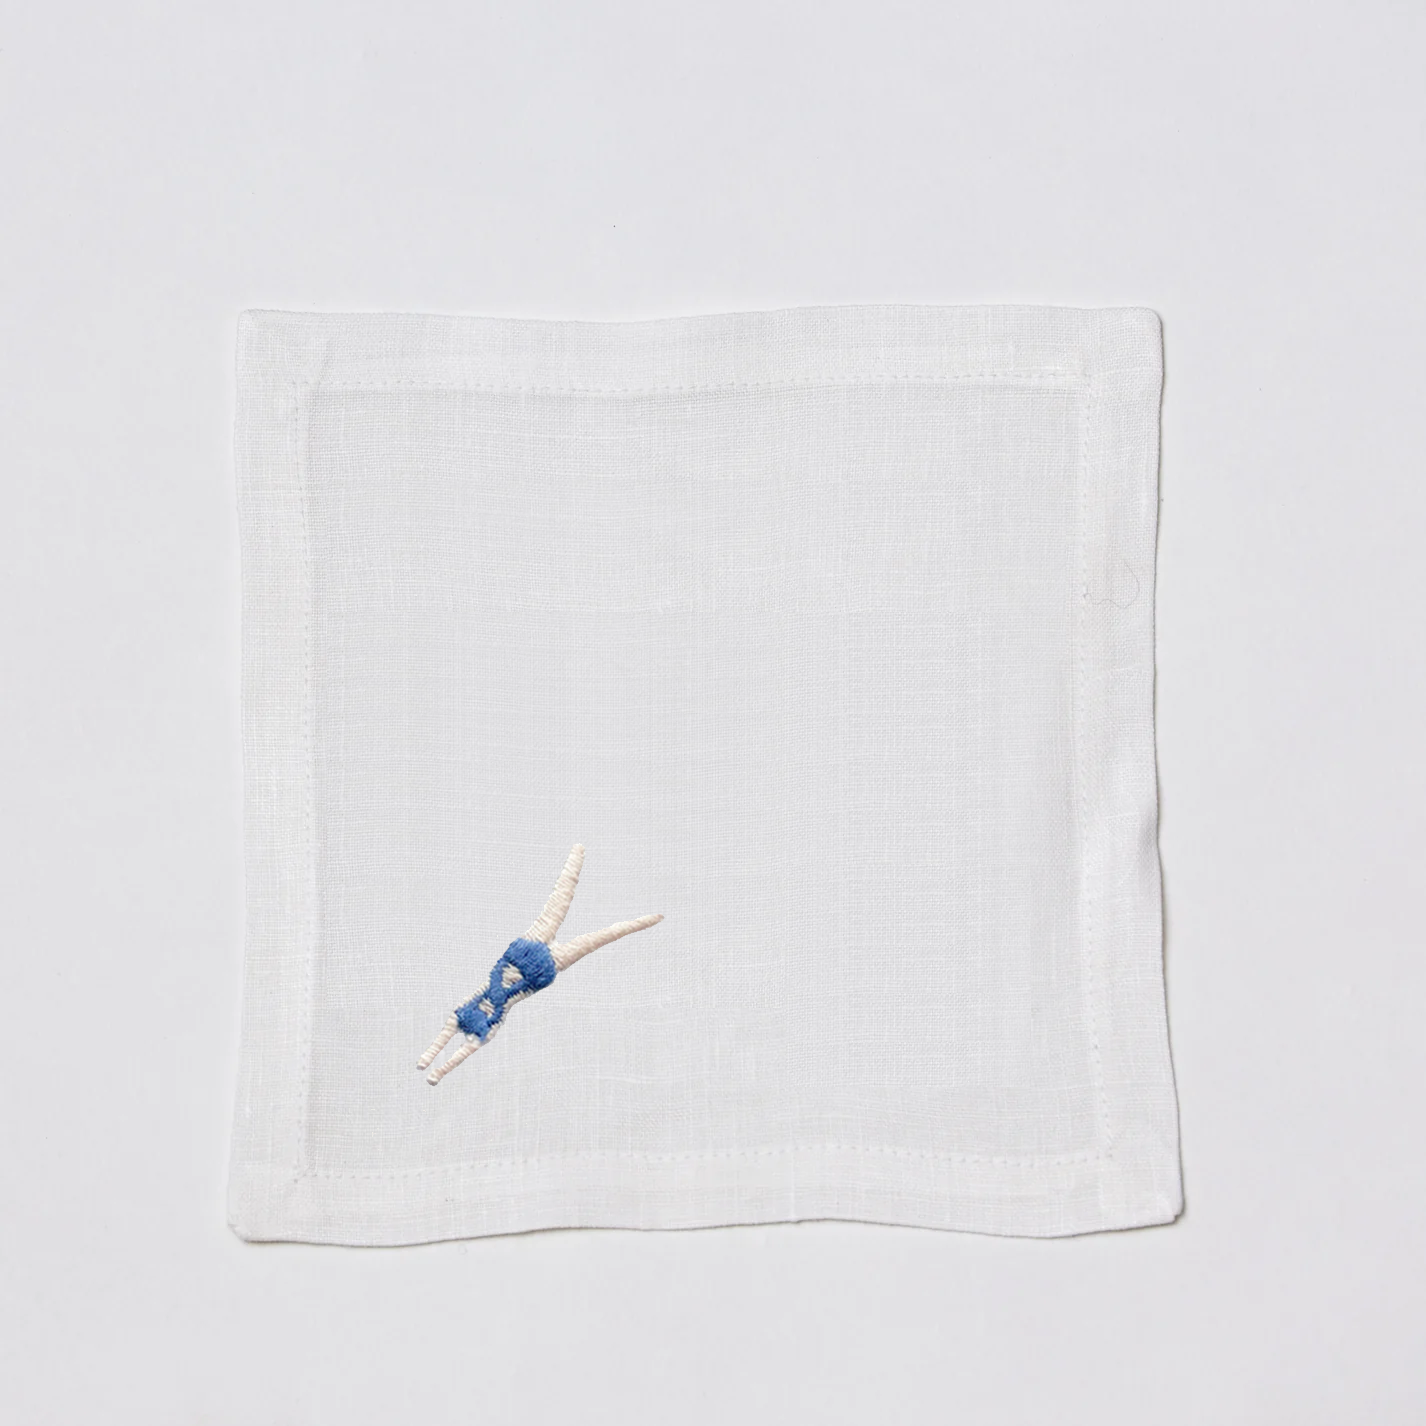 Embroidered Swimmer Cocktail Napkin Coaster, set of 4